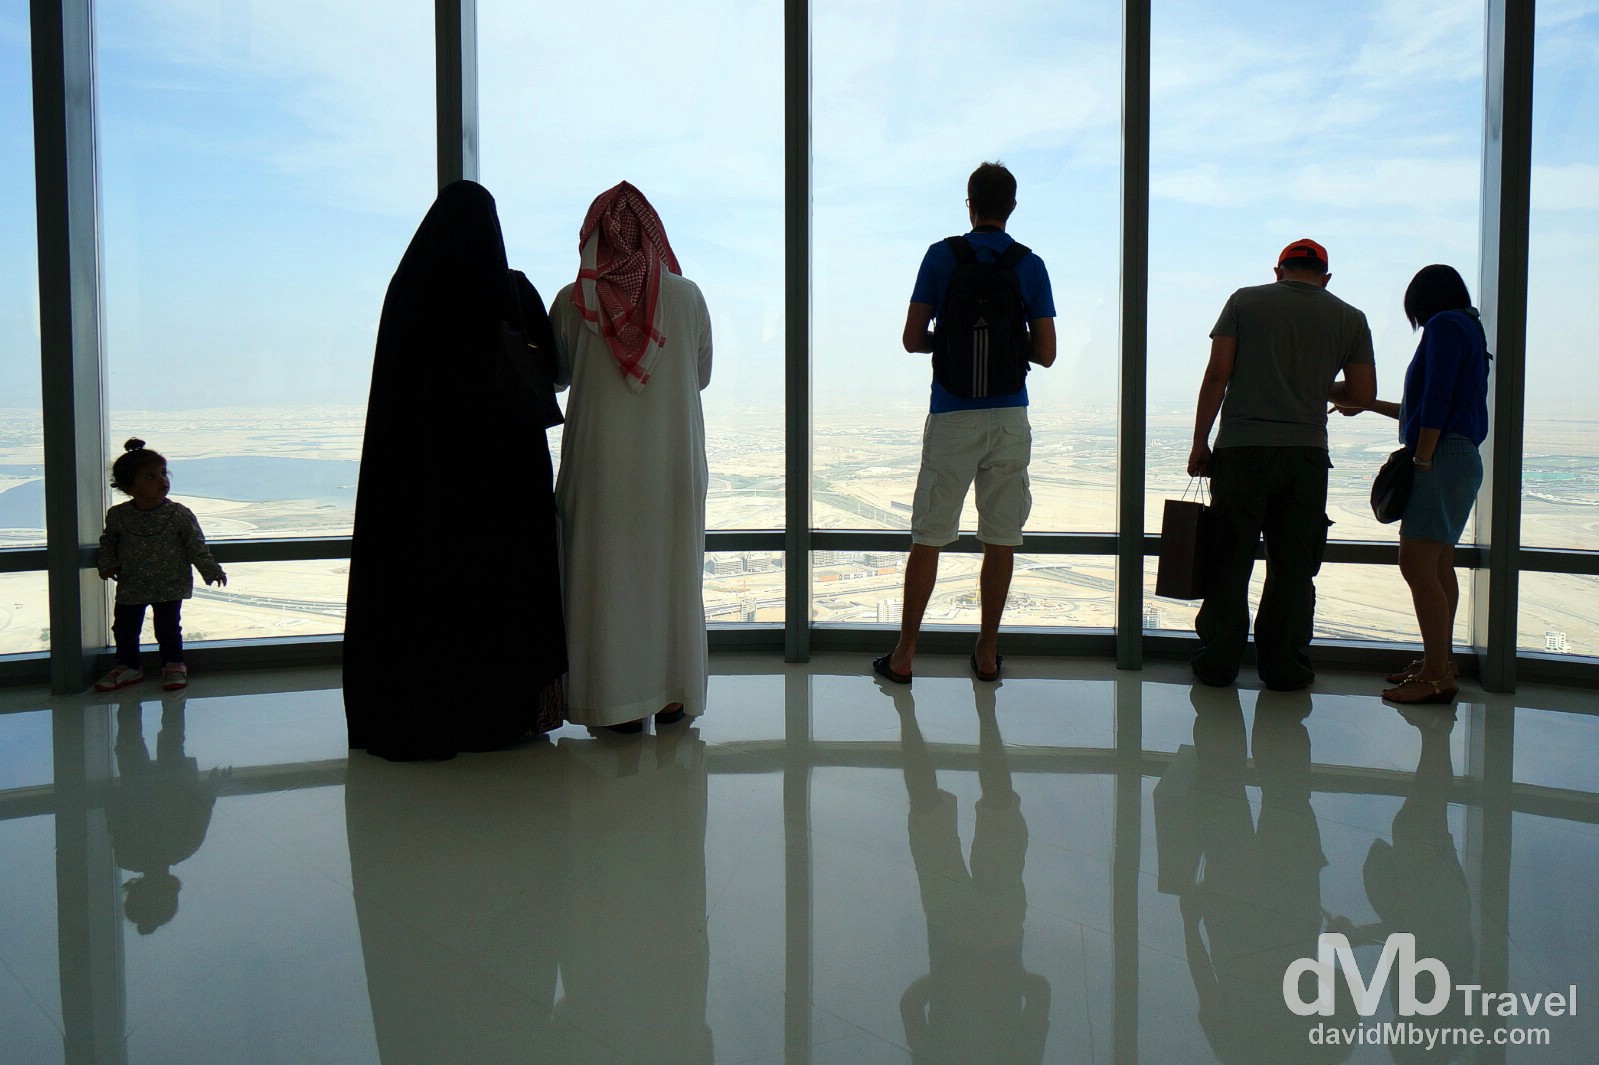 Viewing Dubai from At The Top, the 124th floor viewing deck of the 829.8 metre Burj Khalifa, the world's tallest building. Dubai, UAE. April 18th, 2014. 